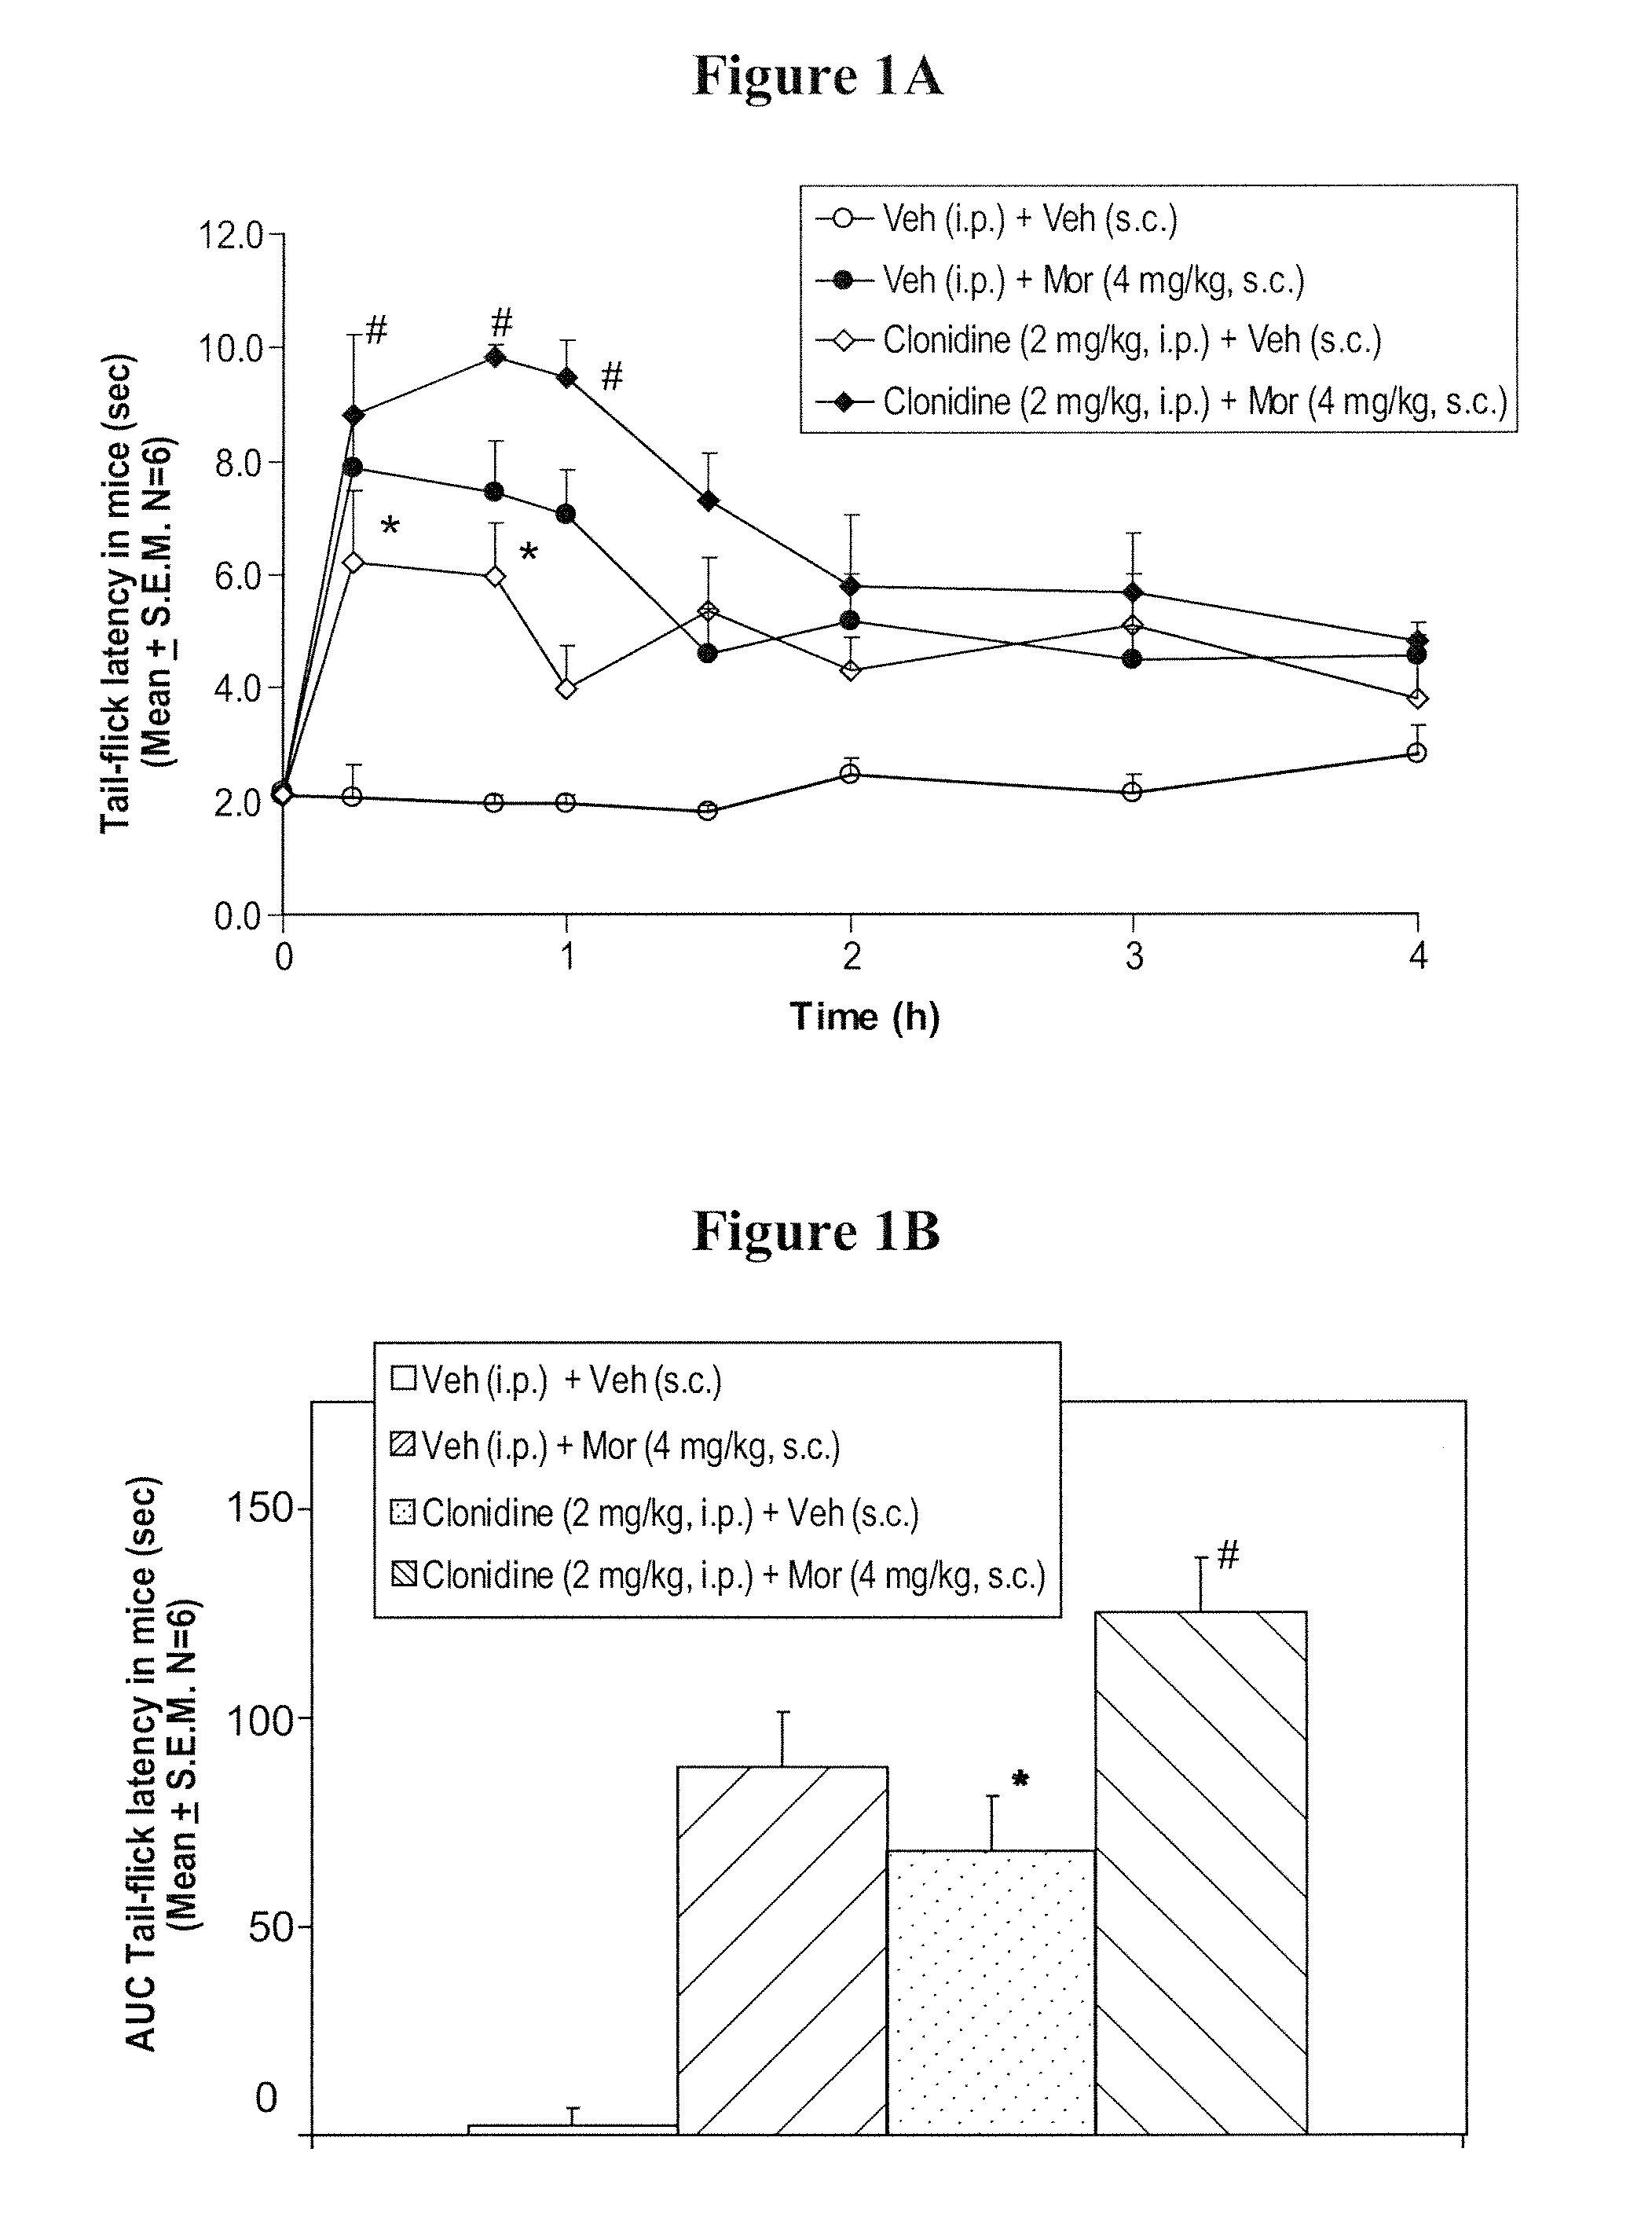 Methods to Treat Pain Using an Alpha-2 Adrenergic Agonist and an Endothelin Antagonist